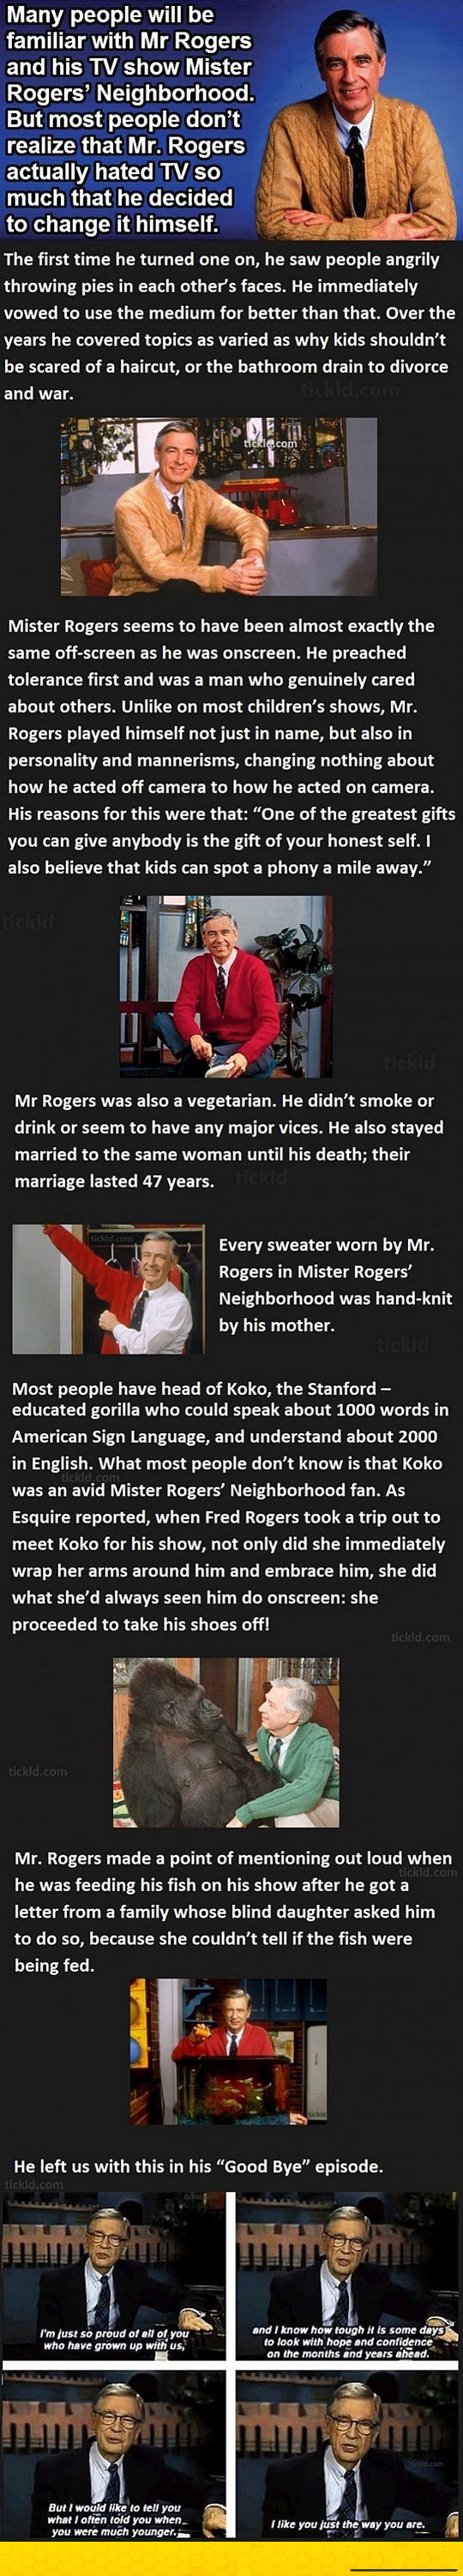 cool-Mr-Rogers-life-story